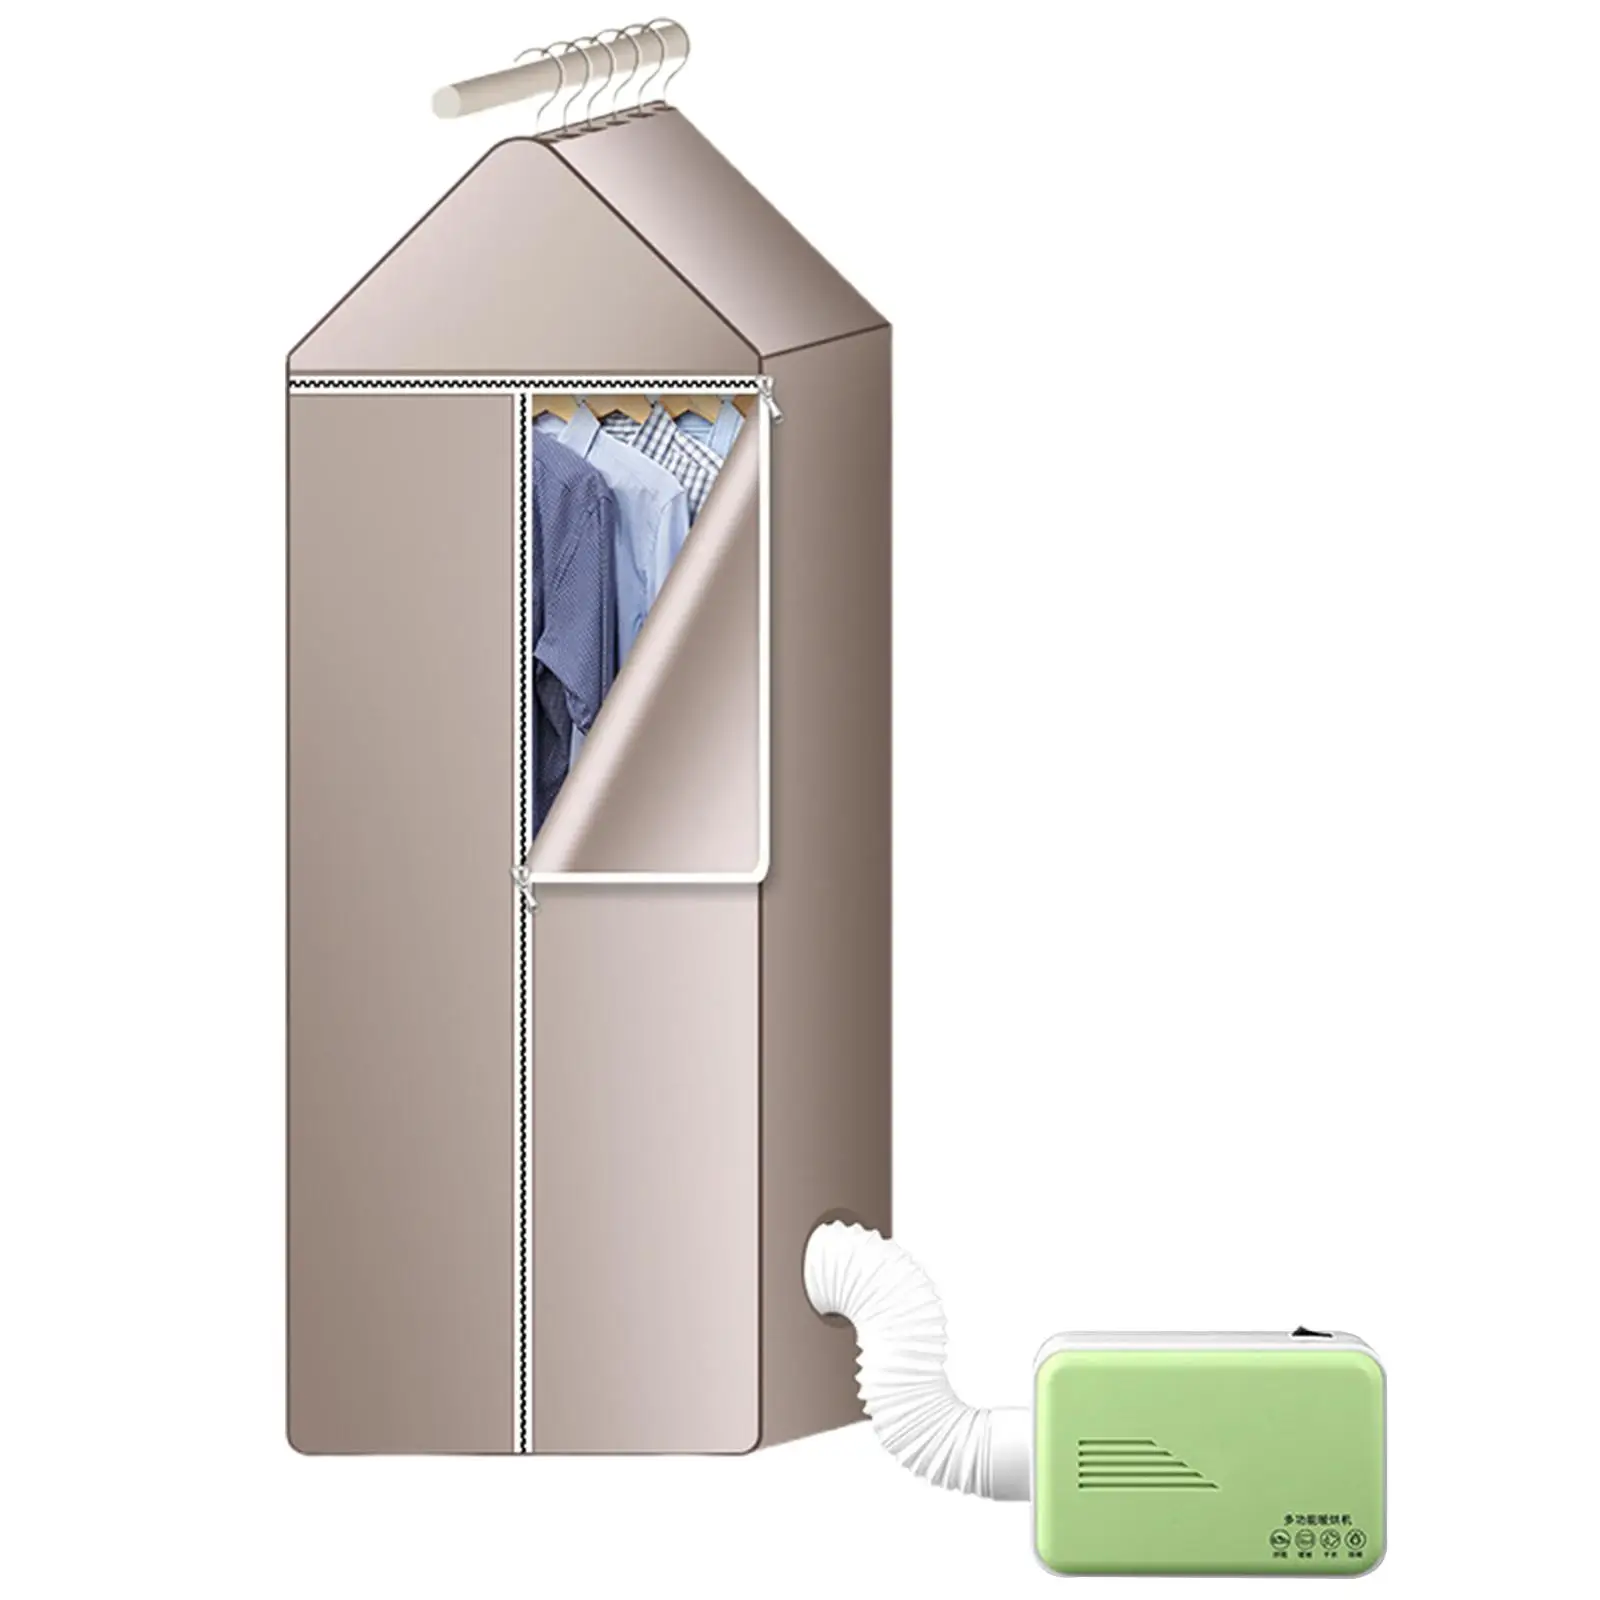 Portable Electric Clothes Dryer Fast Drying Folding Energy Saving Drying Rack Laundry Dryer for Home RV Travel Laundry Gifts